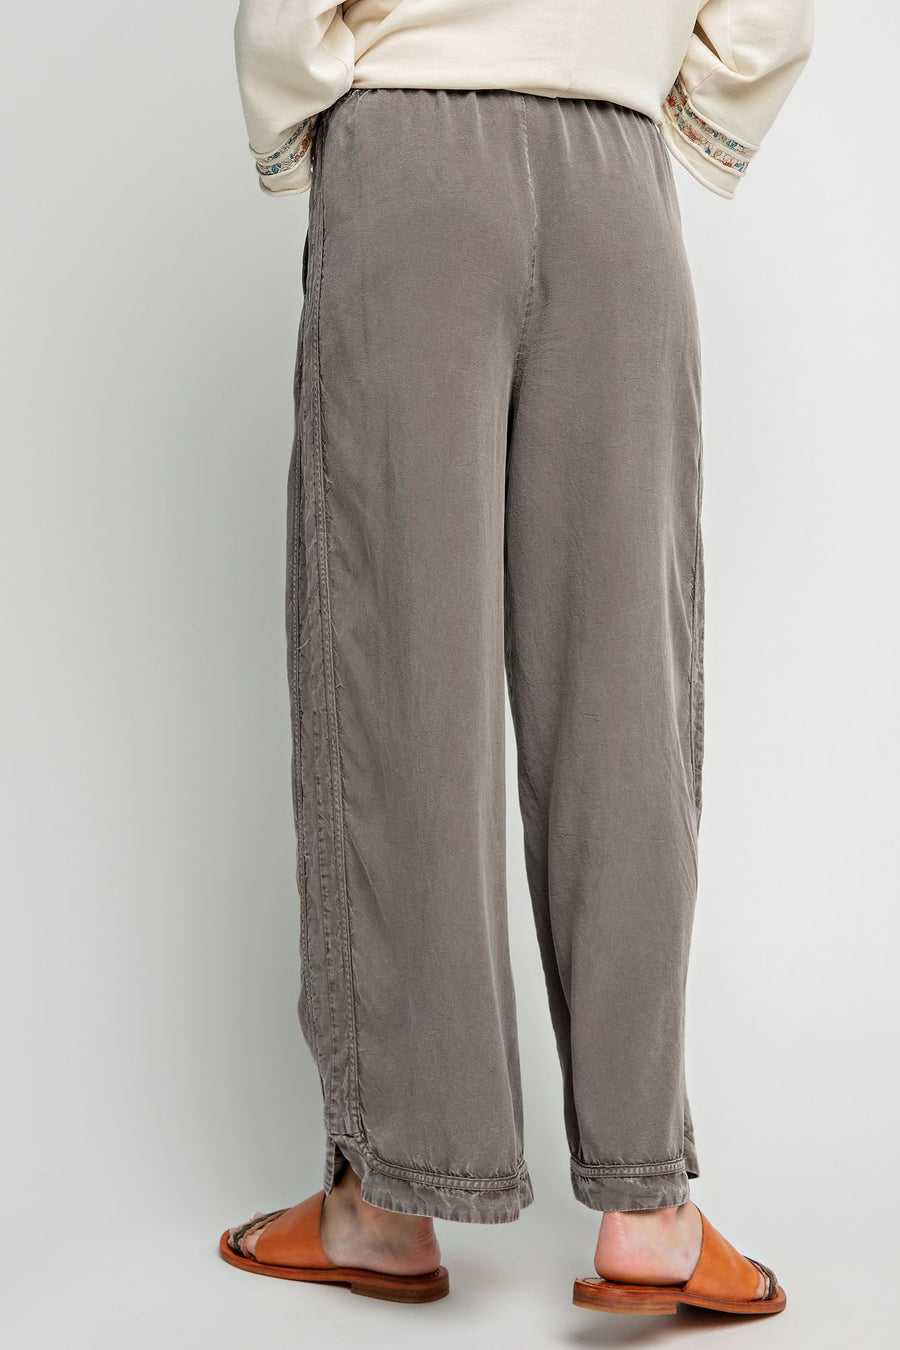 Allison Mineral Washed Soft Twill Wide Leg Pants